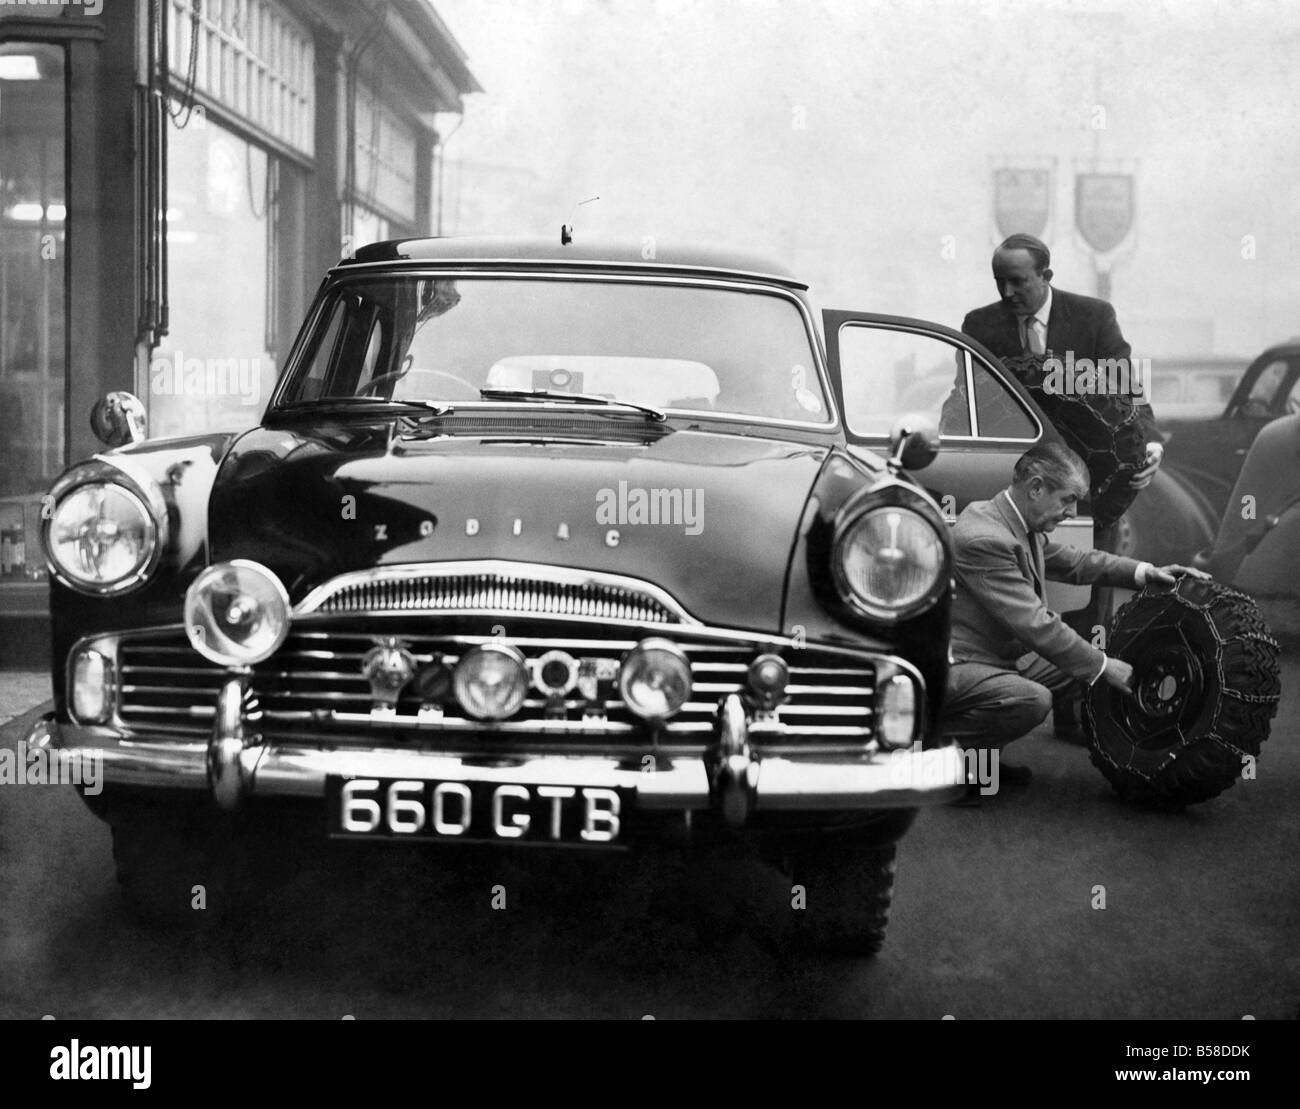 Loading the Ford Zodiac estate car, in which he will compete in the Monte Carlo rally, with special chained wheels for the Arctic conditions expected are Mr. C.A. Bennett, General Works Manager of Quick's of Manchester, (nearest camera), and Mr. Norman Quick the Managing Director of the firm, who will be one of the drivers. January 1959 P005818 Stock Photo